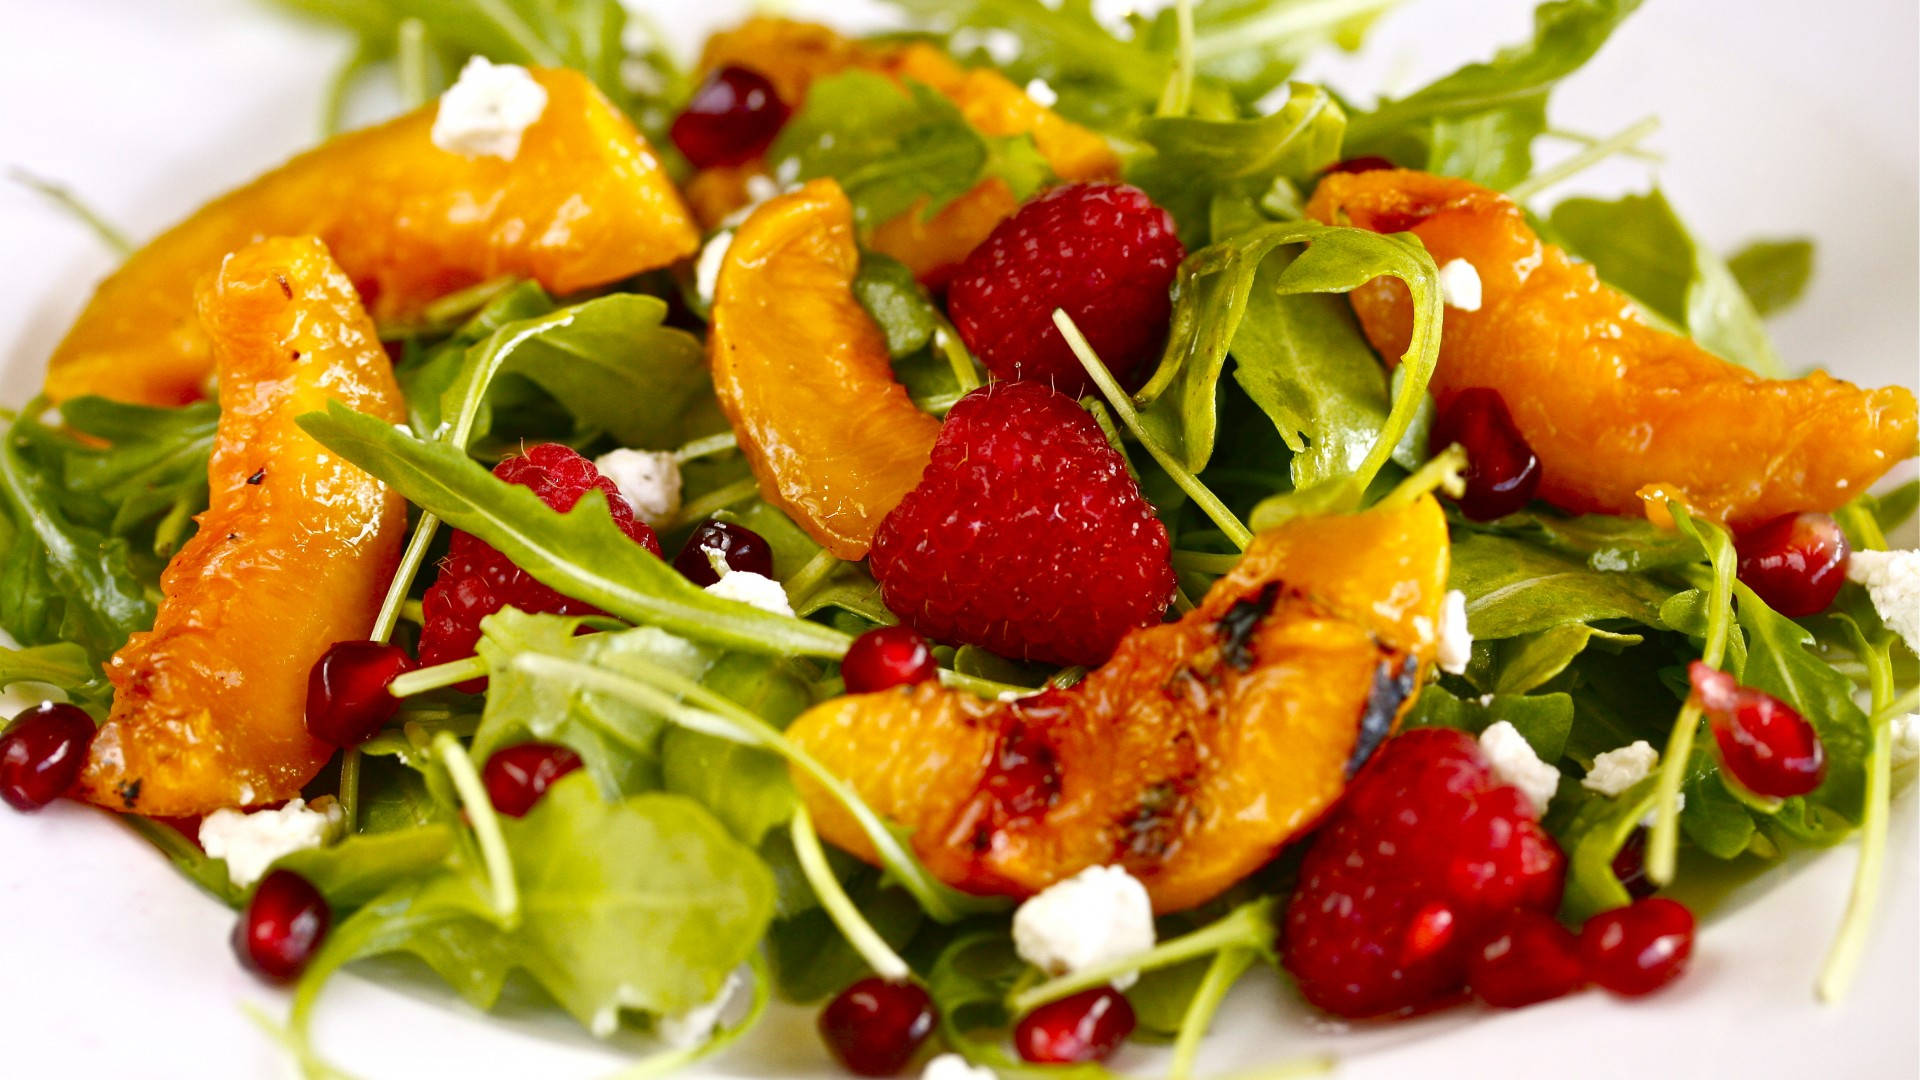 Arugula With Berries, Peaches, And Pomegranate Wallpaper